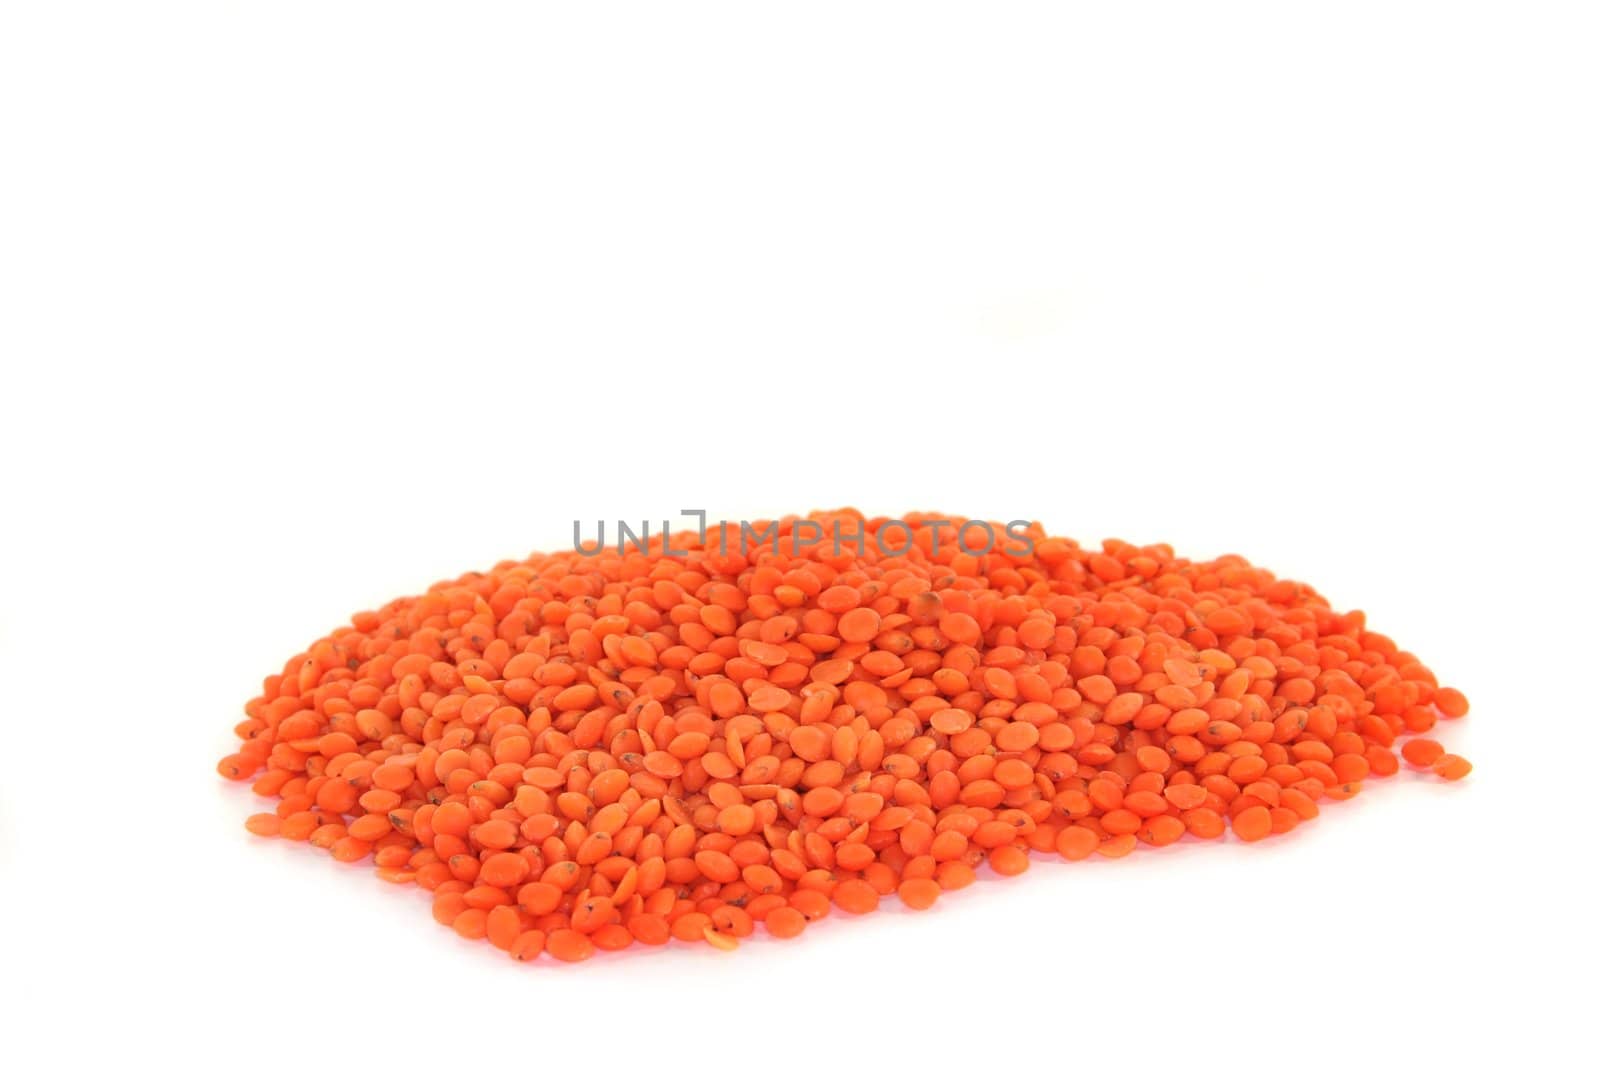 a handful of dried red lentils on a white background
